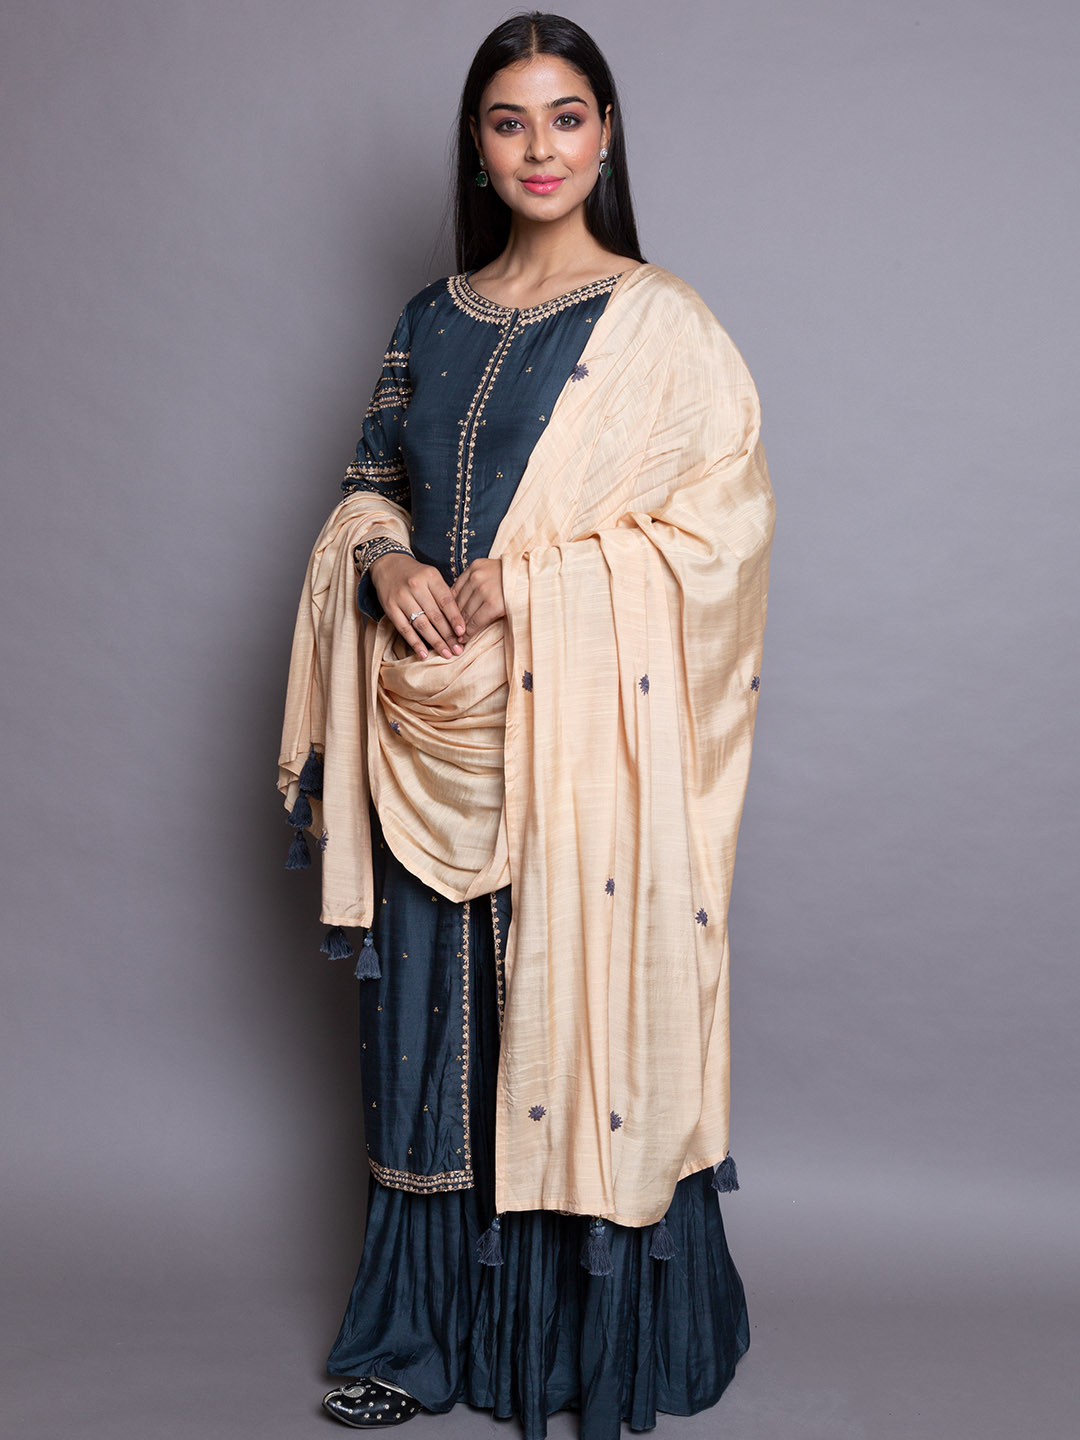 DARK GREY SHRARA SUIT WITH EMBROIDERY